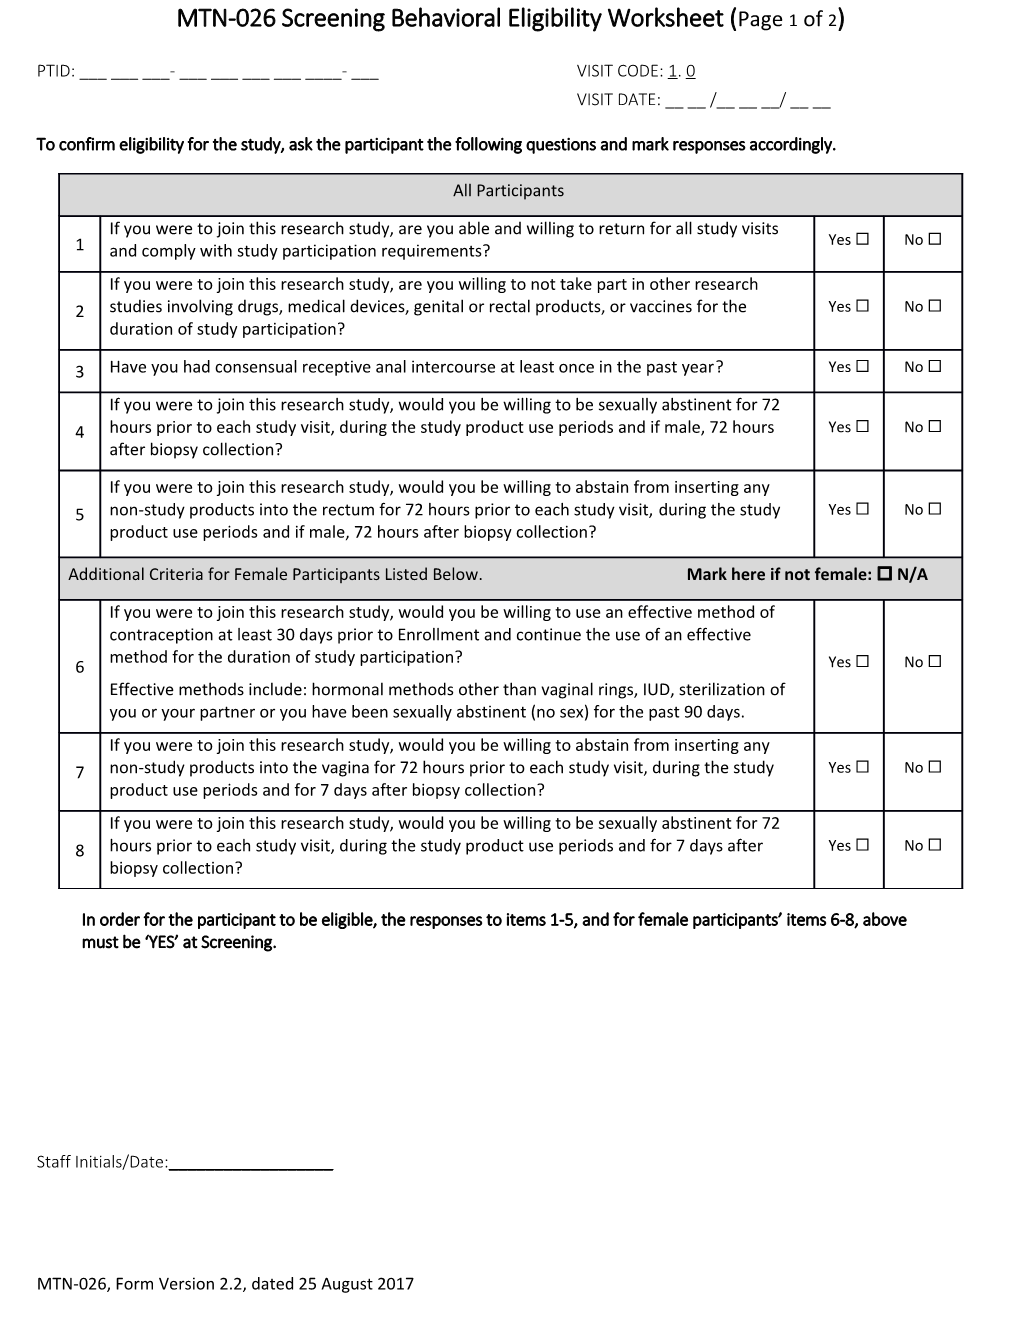 MTN-026 Screeningbehavioral Eligibility Worksheet (Page 1 of 2)